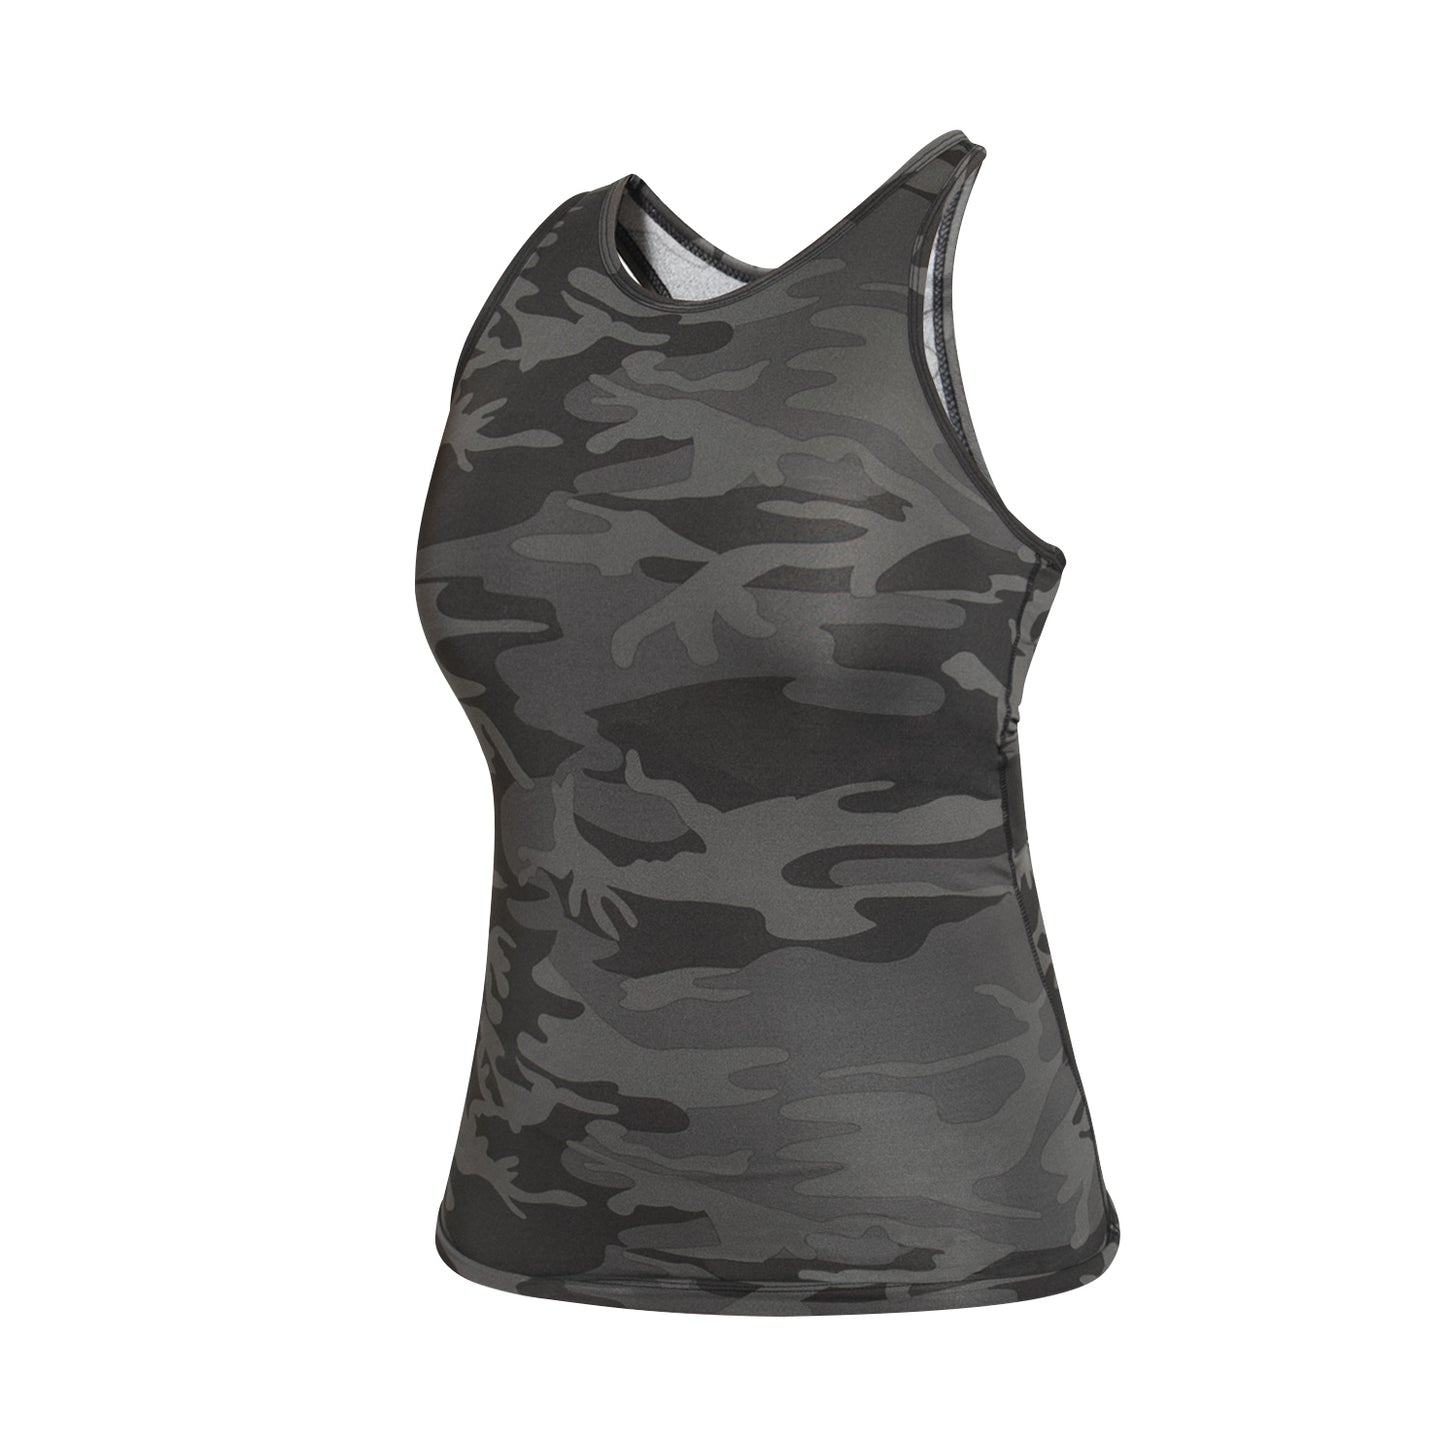 Women's Performance Tank Tops In Black & Woodland Camo Workout Yoga